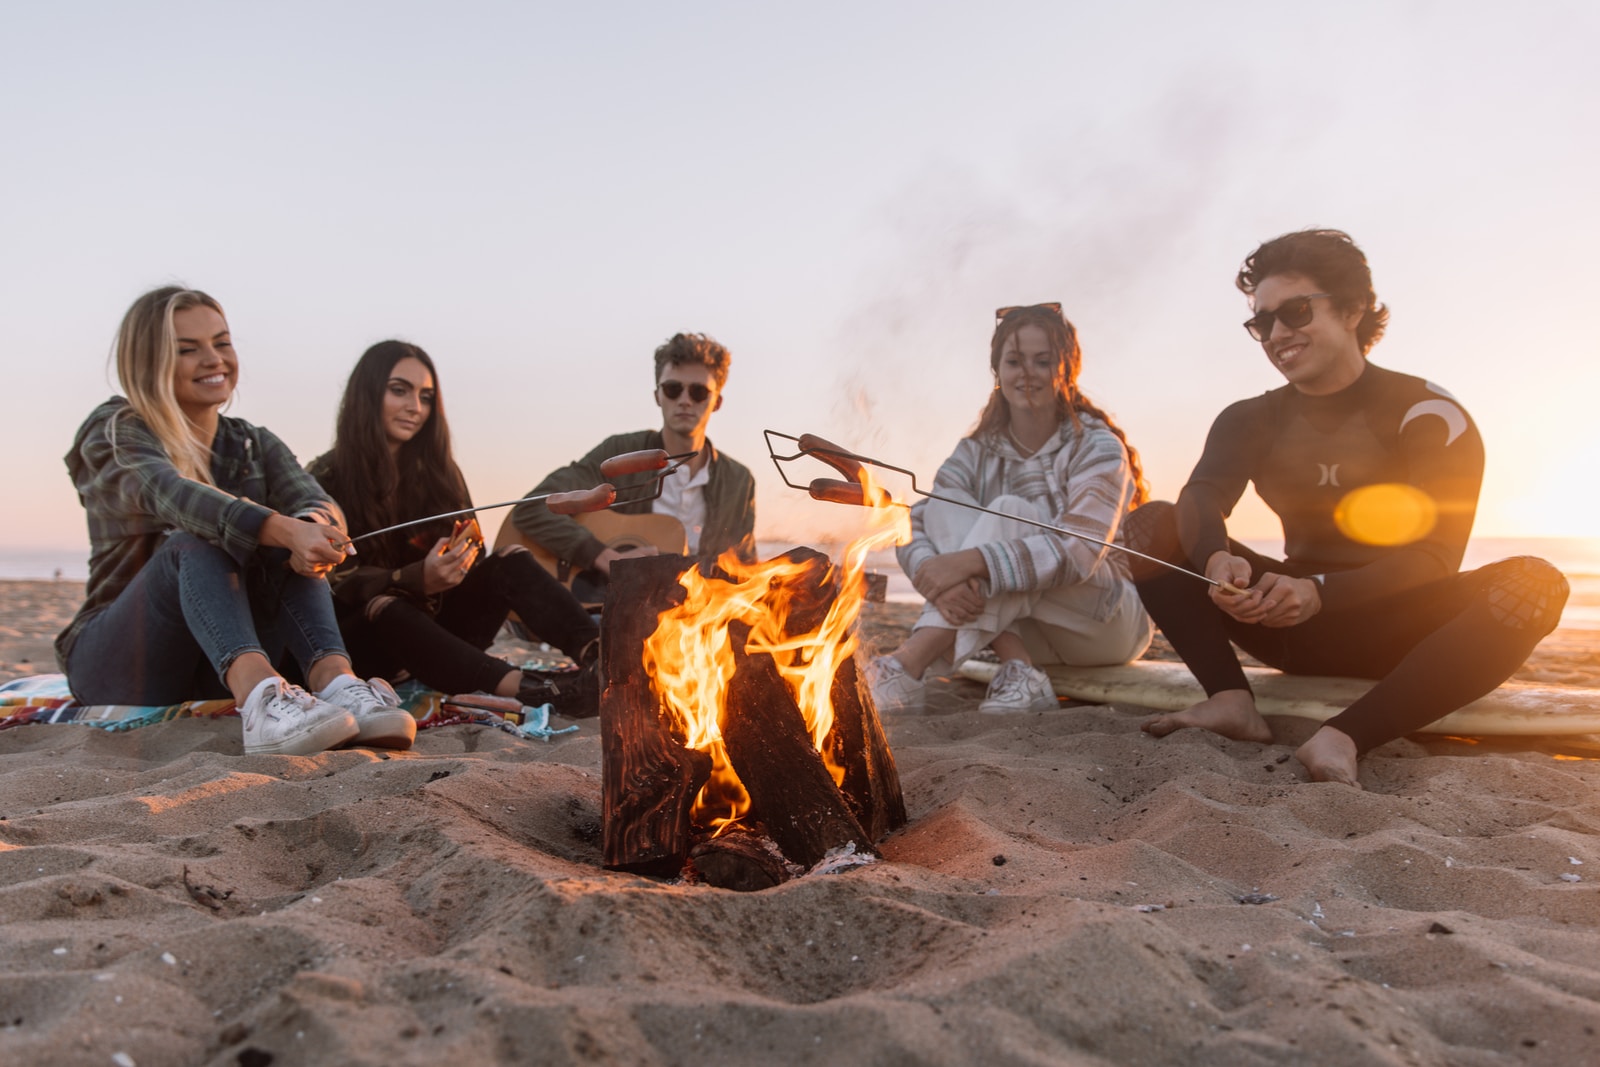 group of people sitting on ground with bonfire